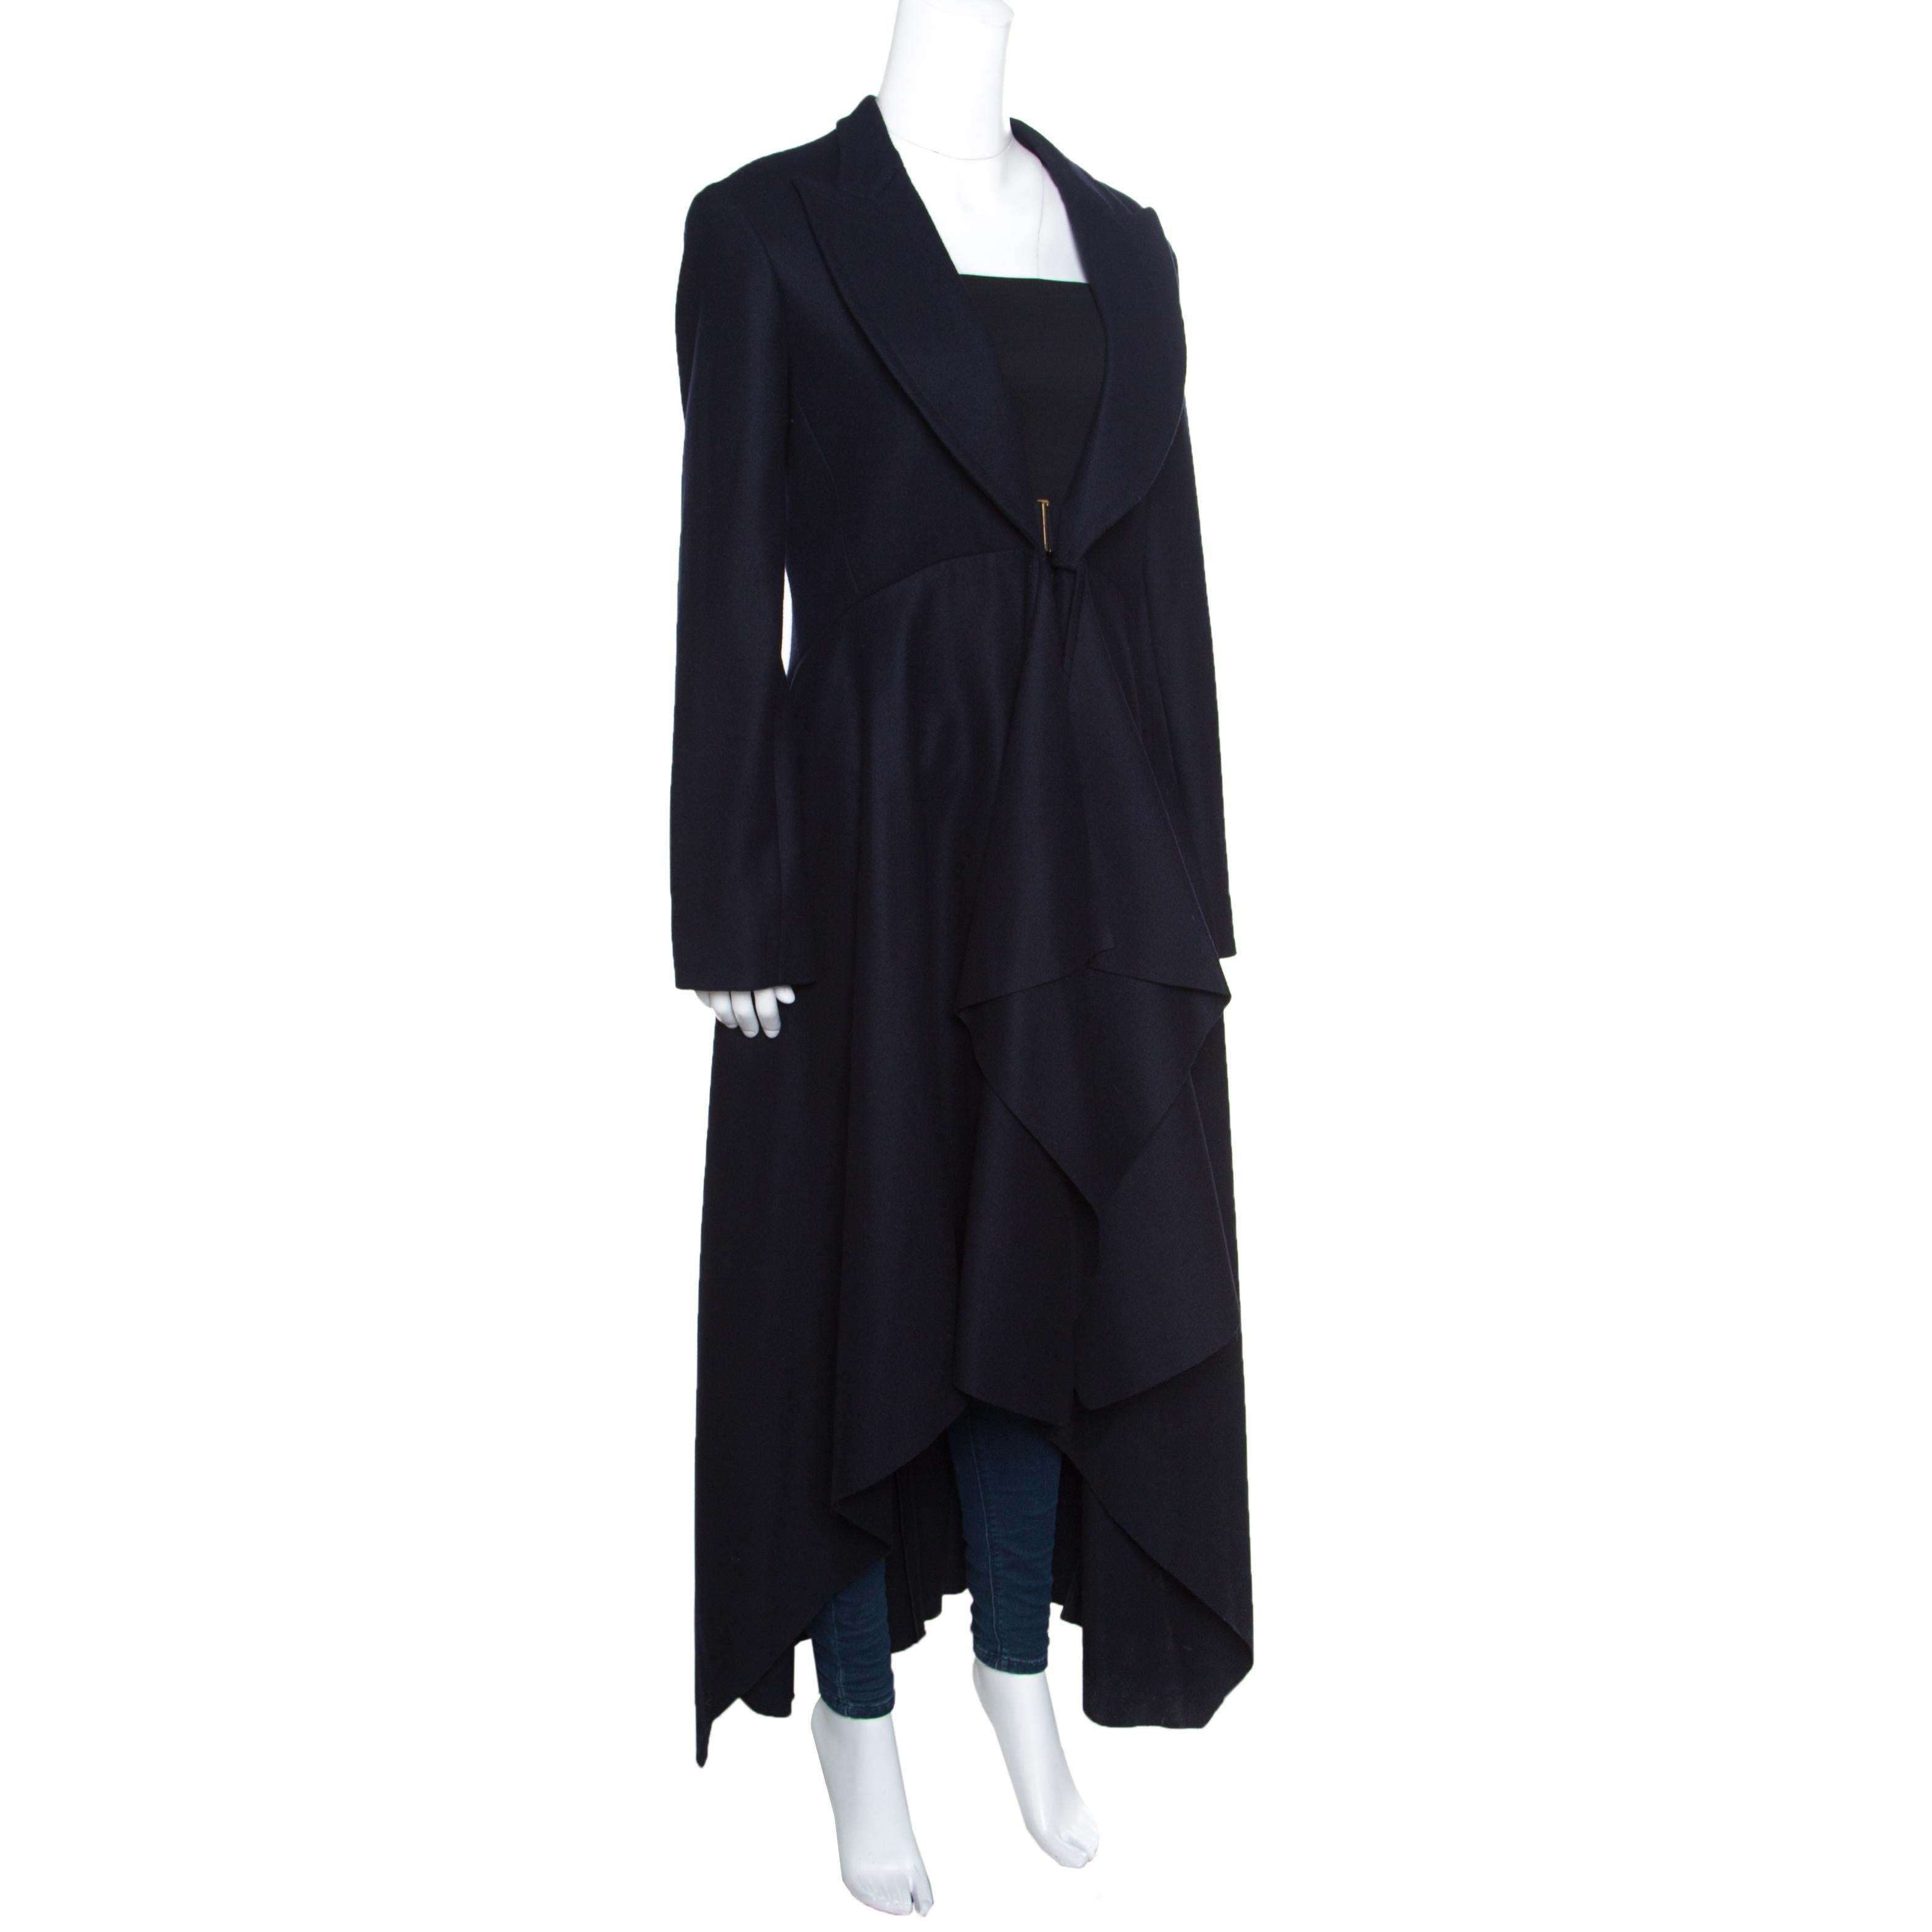 Feel and be the trendiest person in the room whenever you choose to wear this long coat from Celine! It comes tailored from the finest wool and designed to fall as drapes. Long sleeves, a buckle closure and wide lapels make this coat ready to be